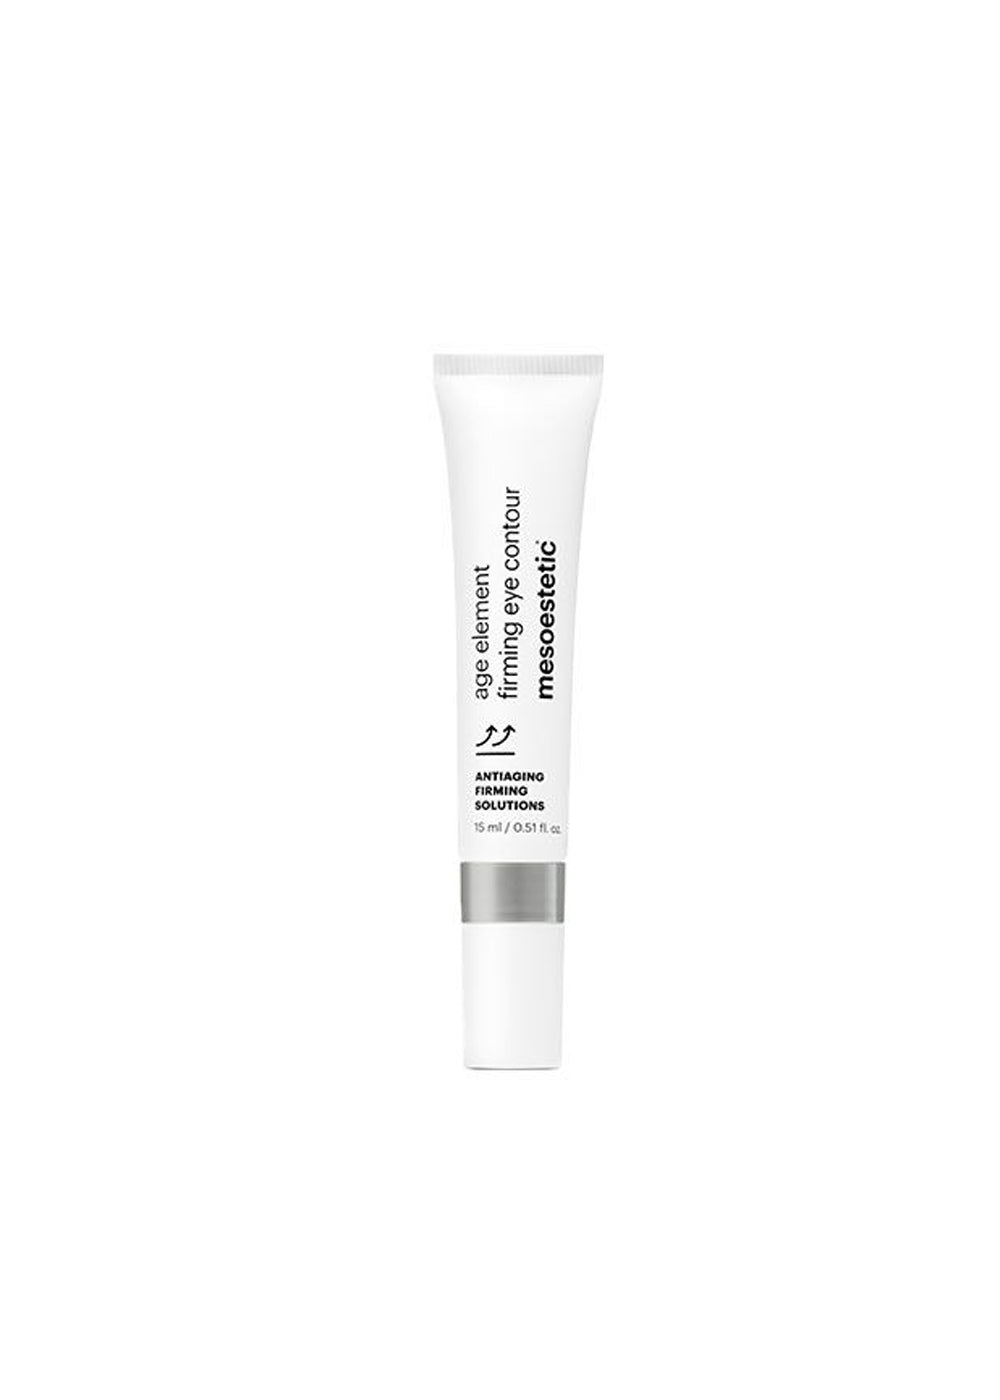 Mesoestetic age element® firming eye contour